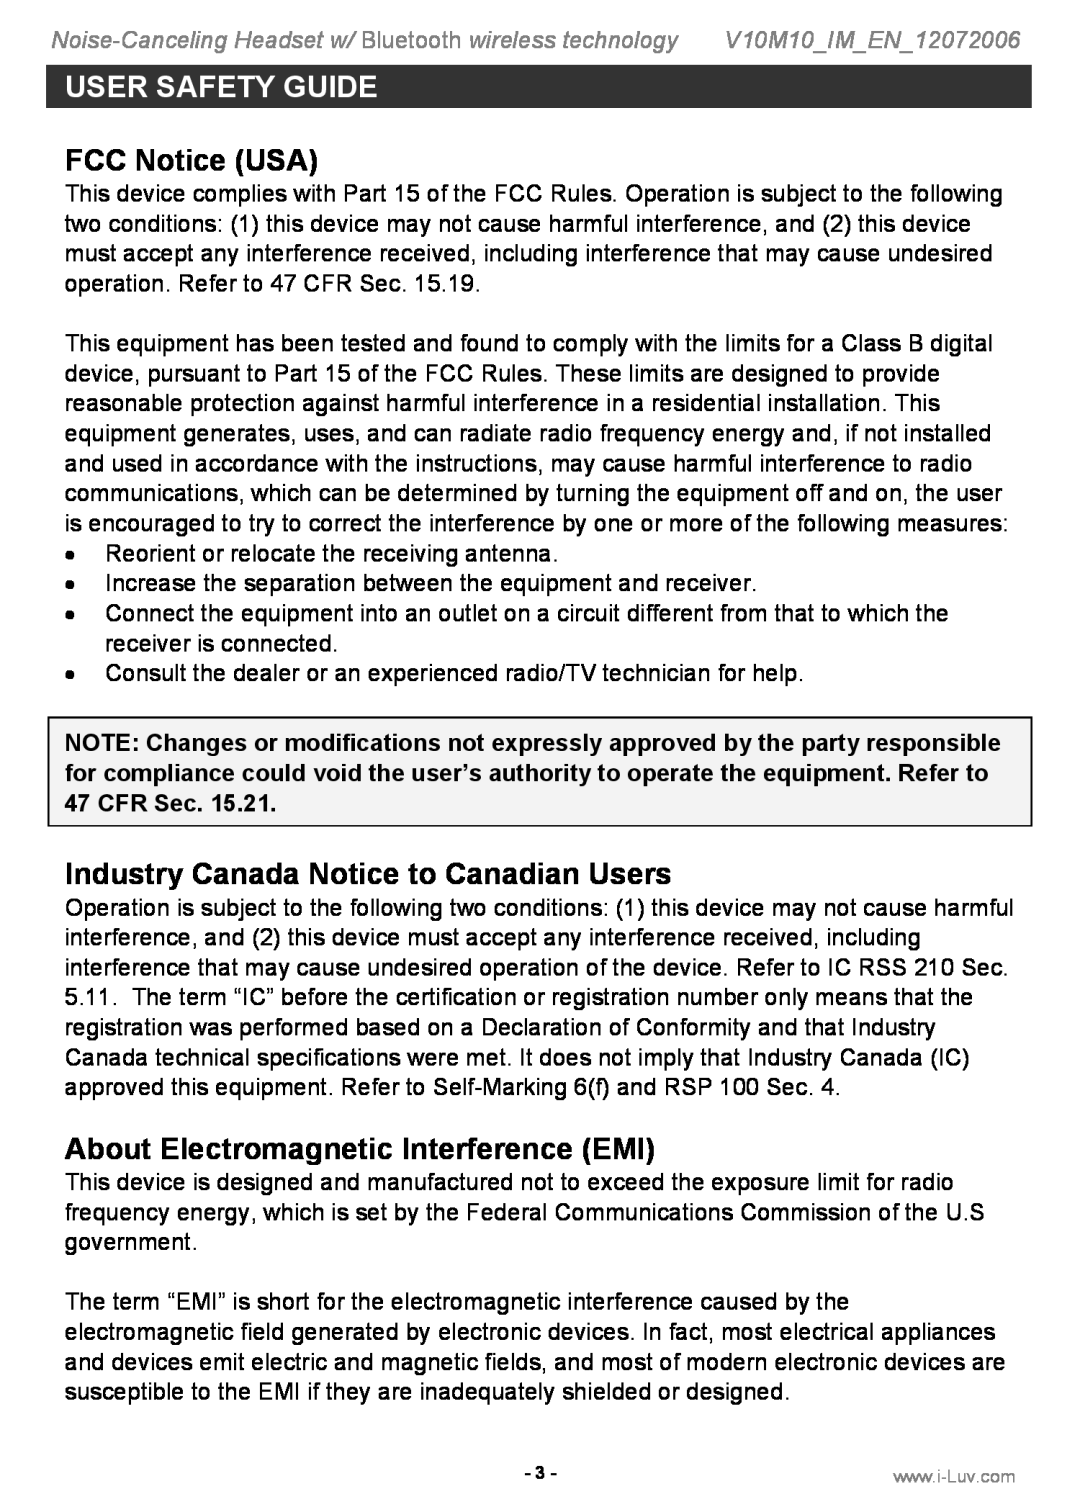 Jwin i903 FCC Notice USA, Industry Canada Notice to Canadian Users, About Electromagnetic Interference EMI 